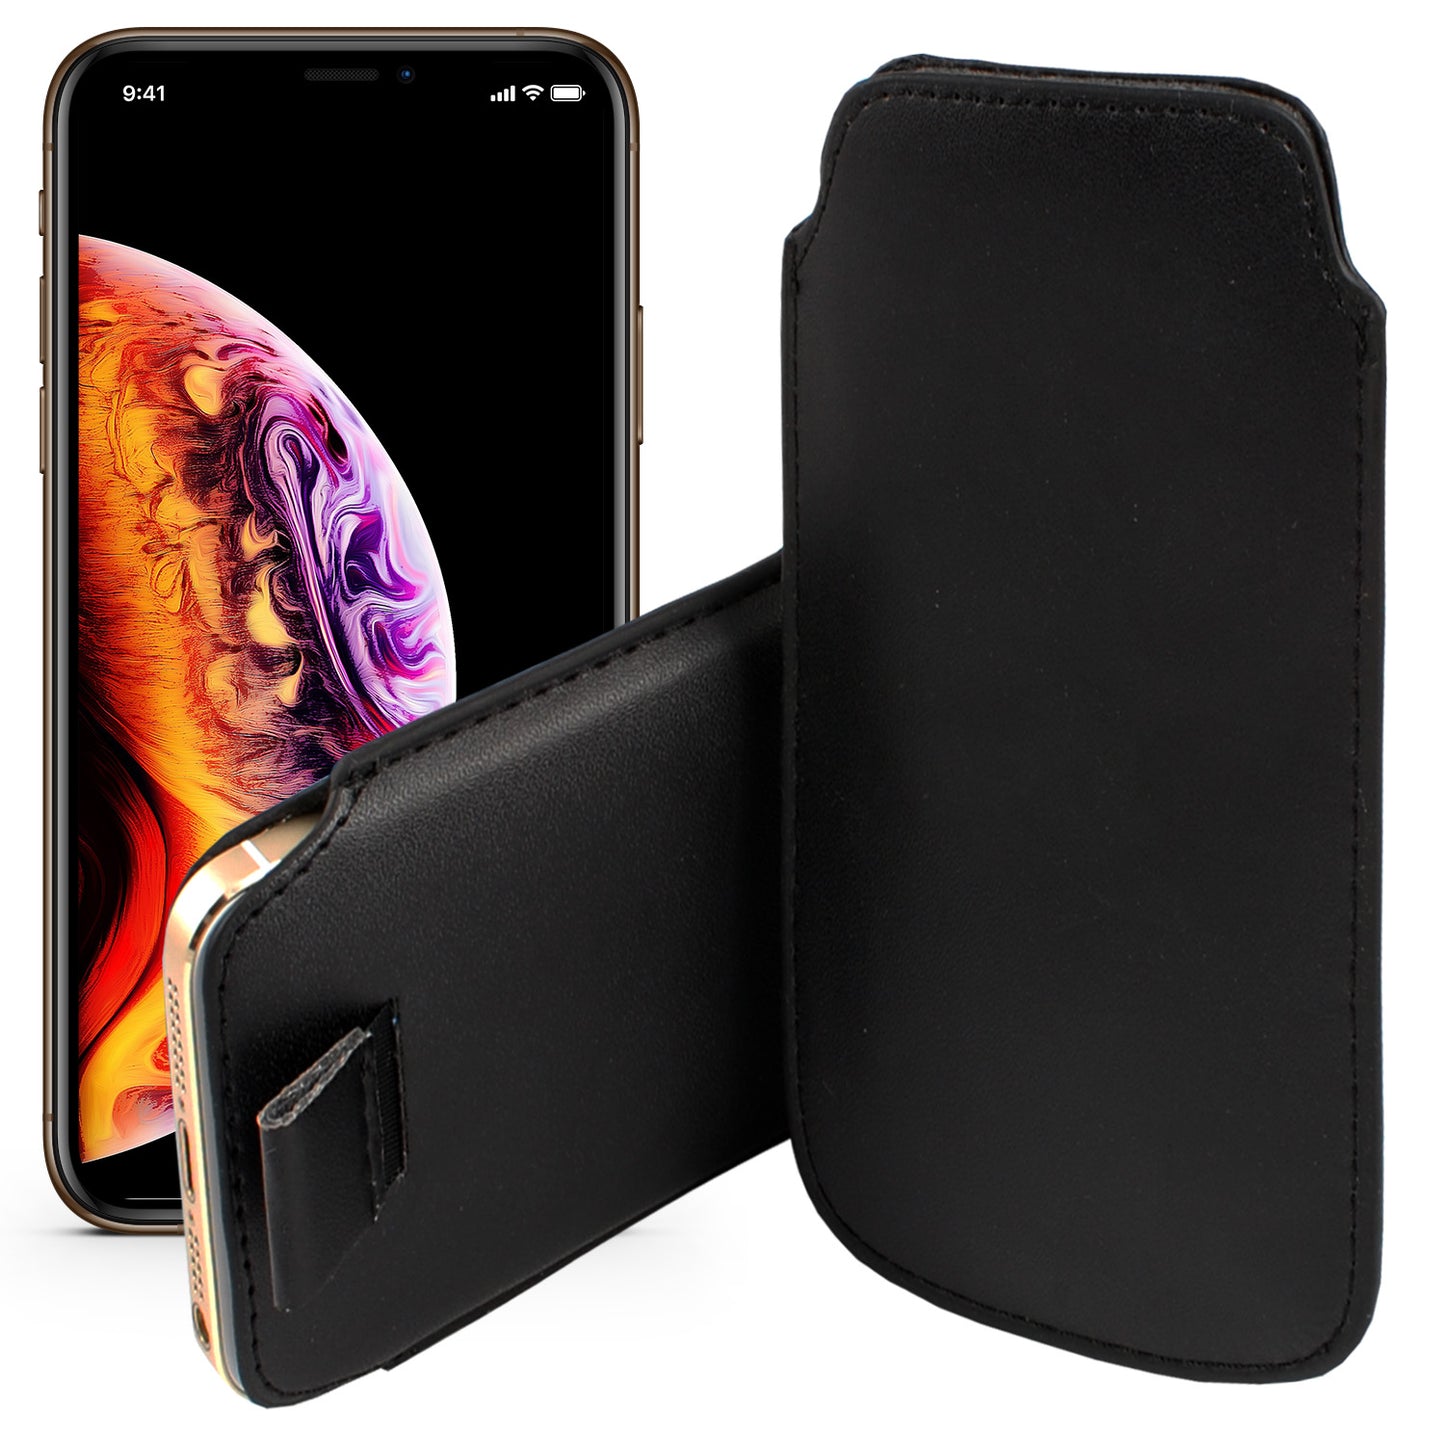 MEZON Apple iPhone XS Max (6.5") Black Pull Tab Slim Faux Leather Pouch Sleeve Case Wireless Charging Compatible